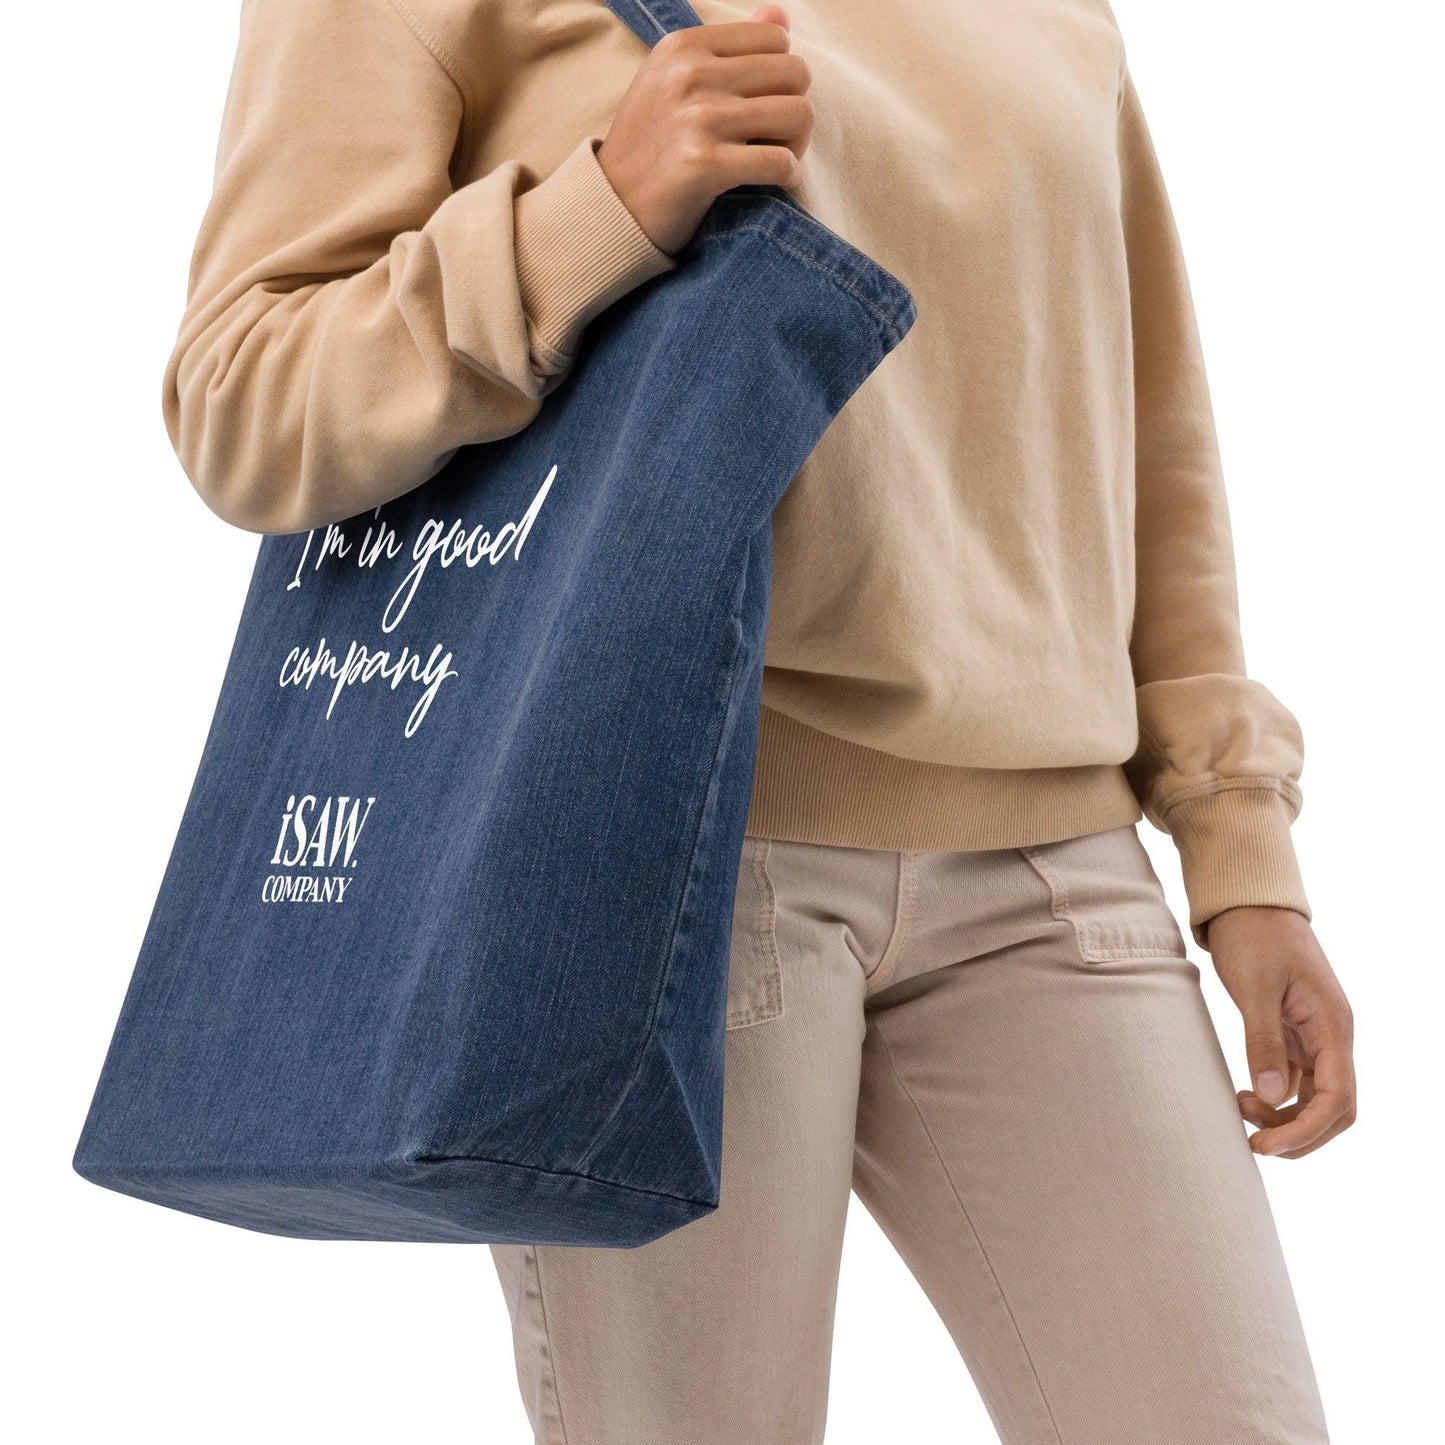 iSAW Denim Tote Bag - iSAW Company